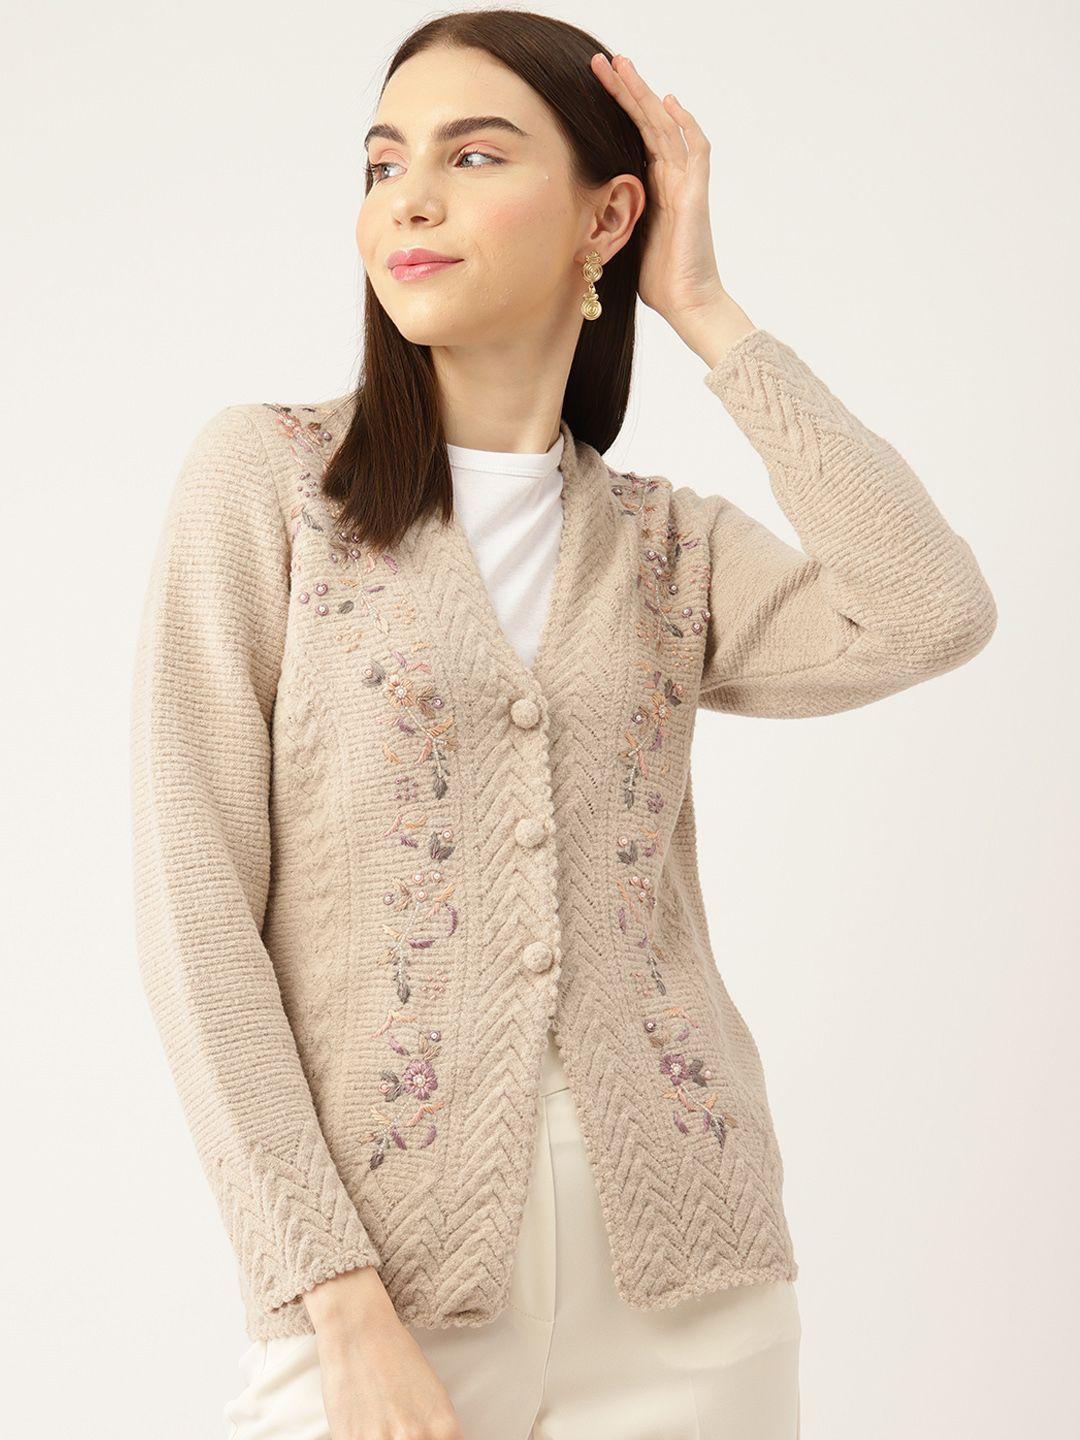 apsley-women-floral-cardigan-with-embellished-detail